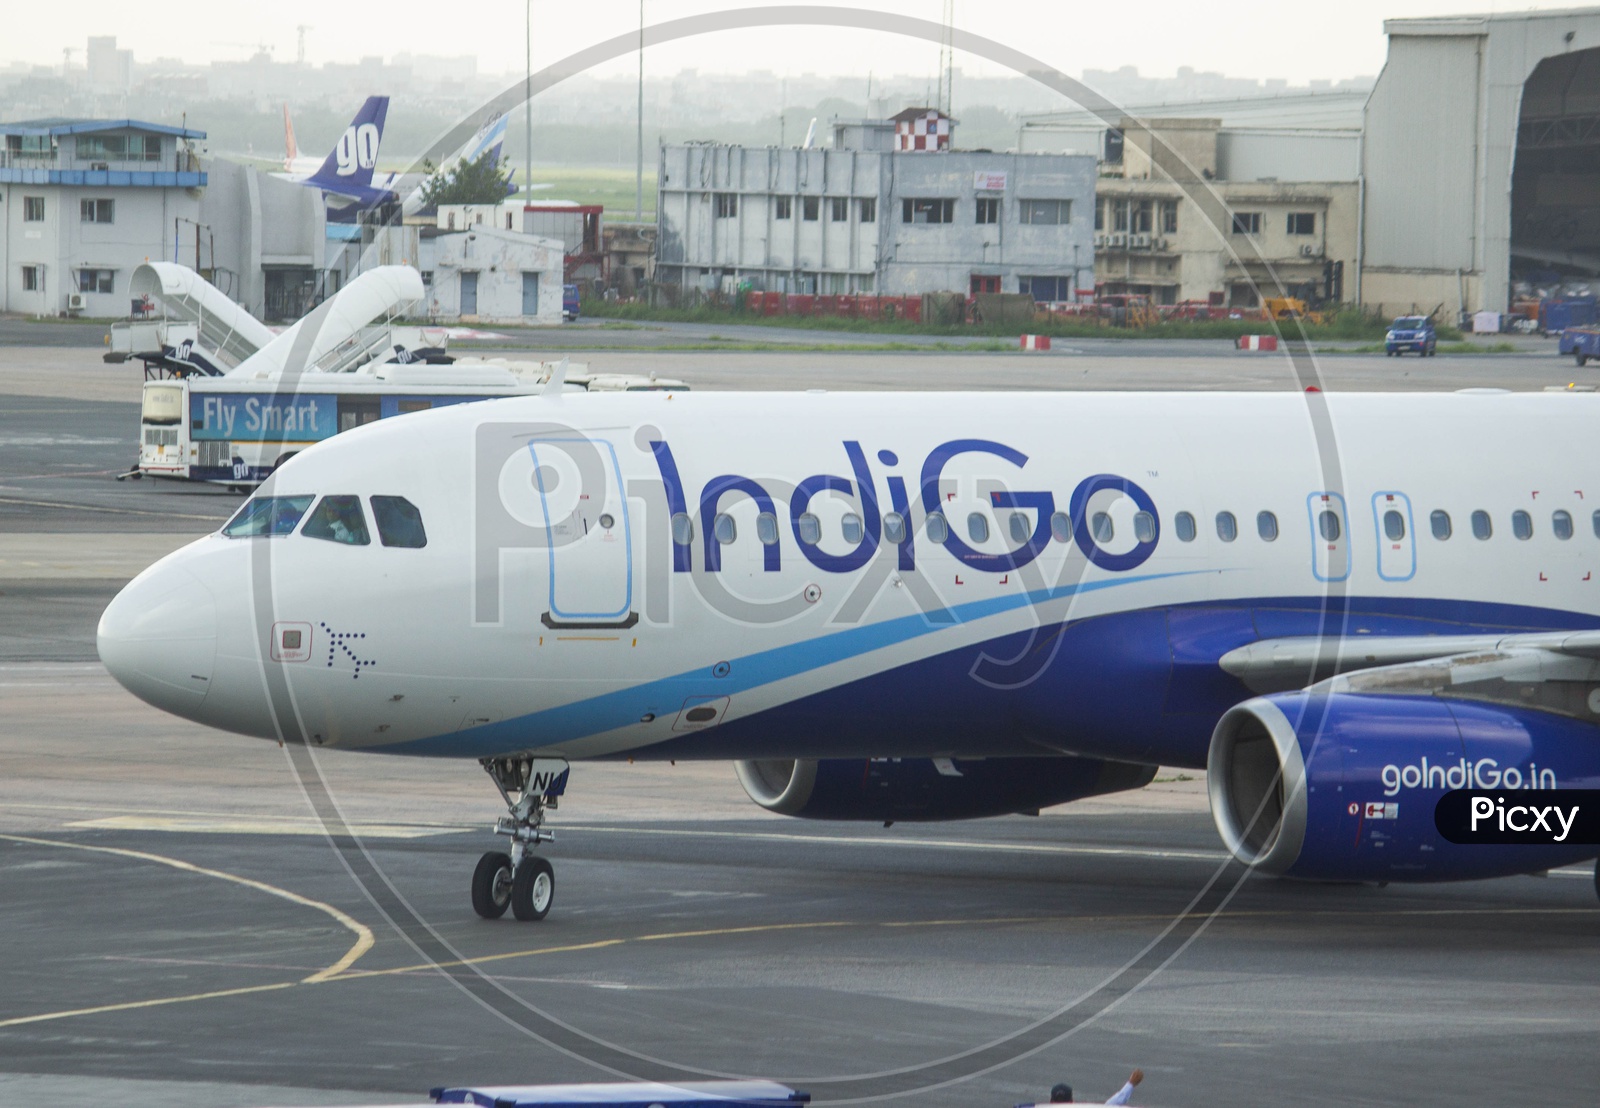 IndiGo a320 taxiing to gate after completing its flight.